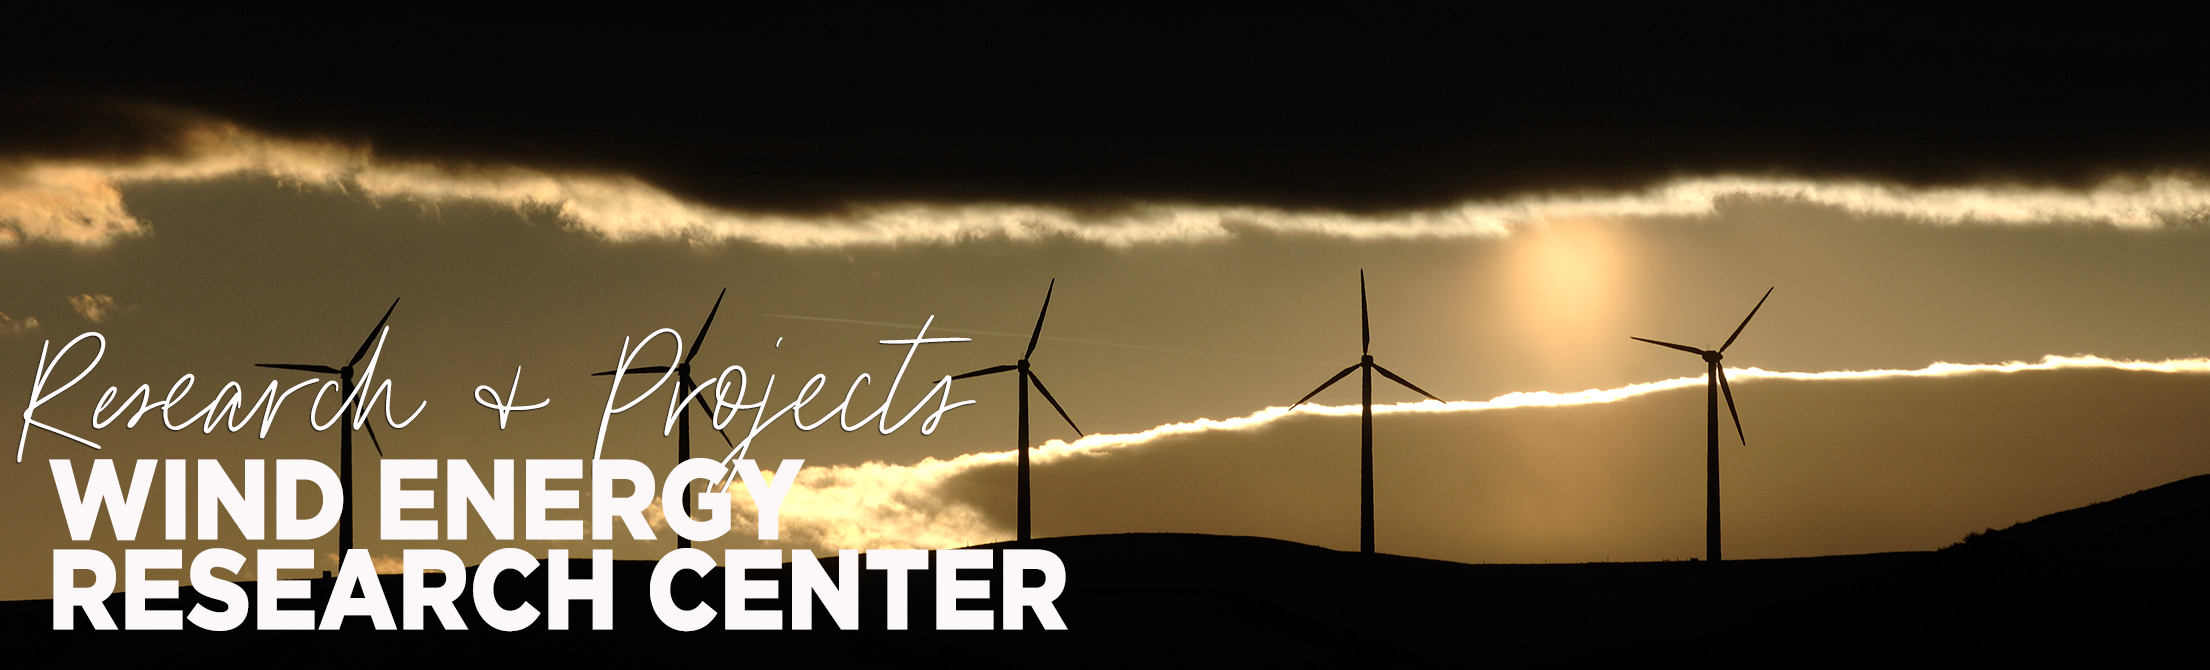 Research areas: Wind Energy Research Center